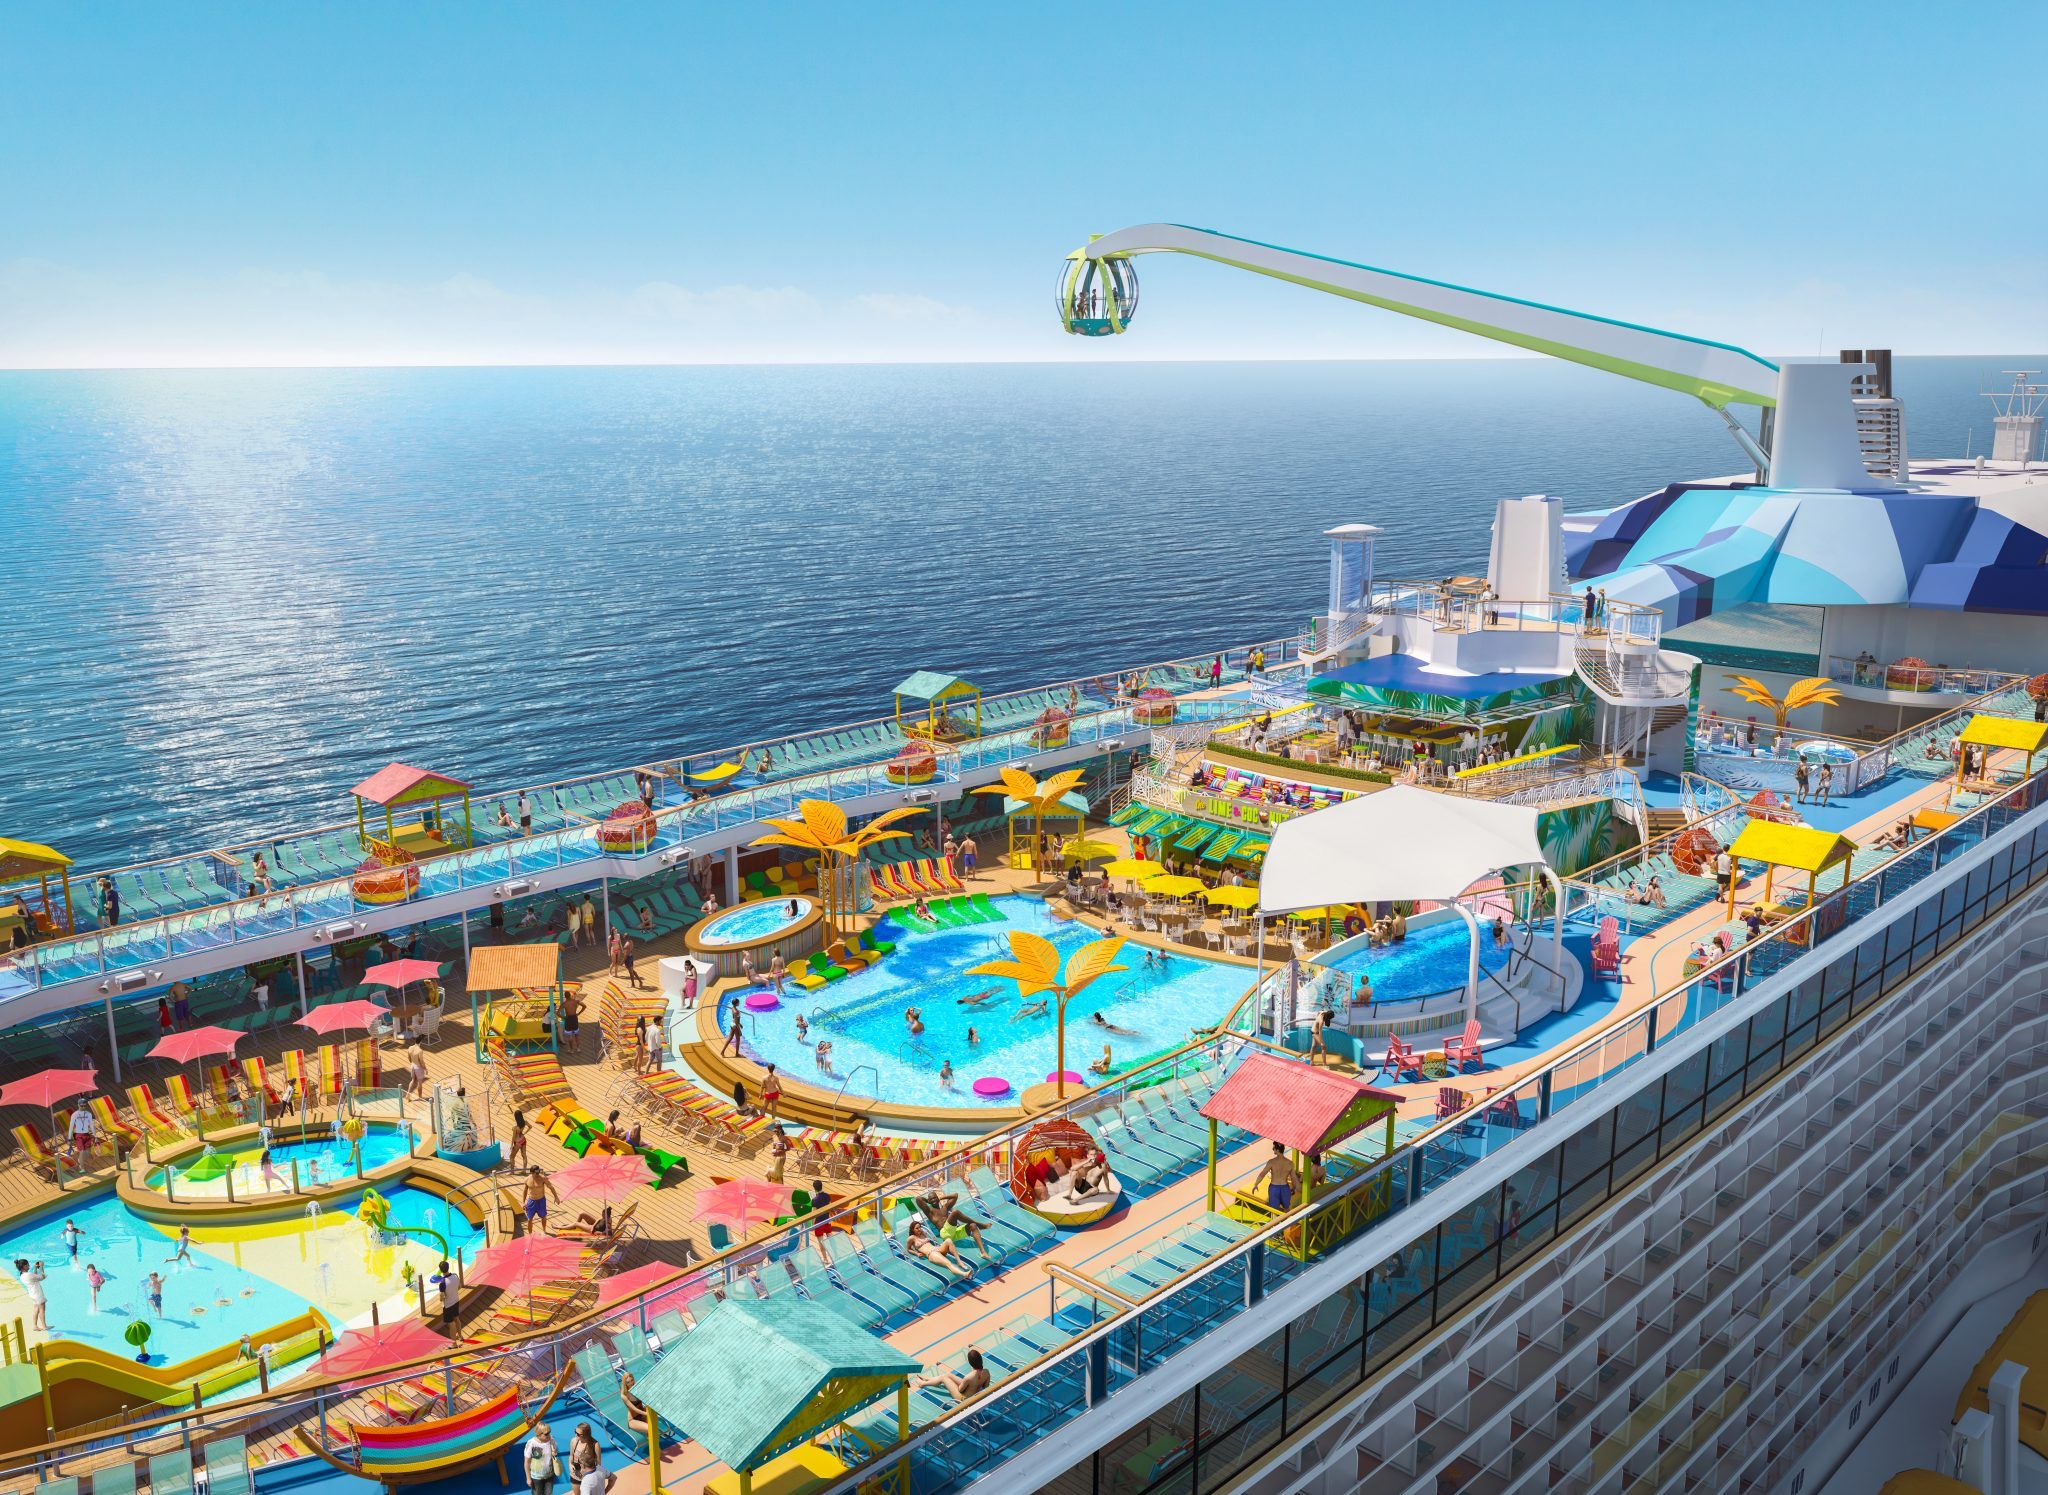 New Details on Odyssey of the Seas